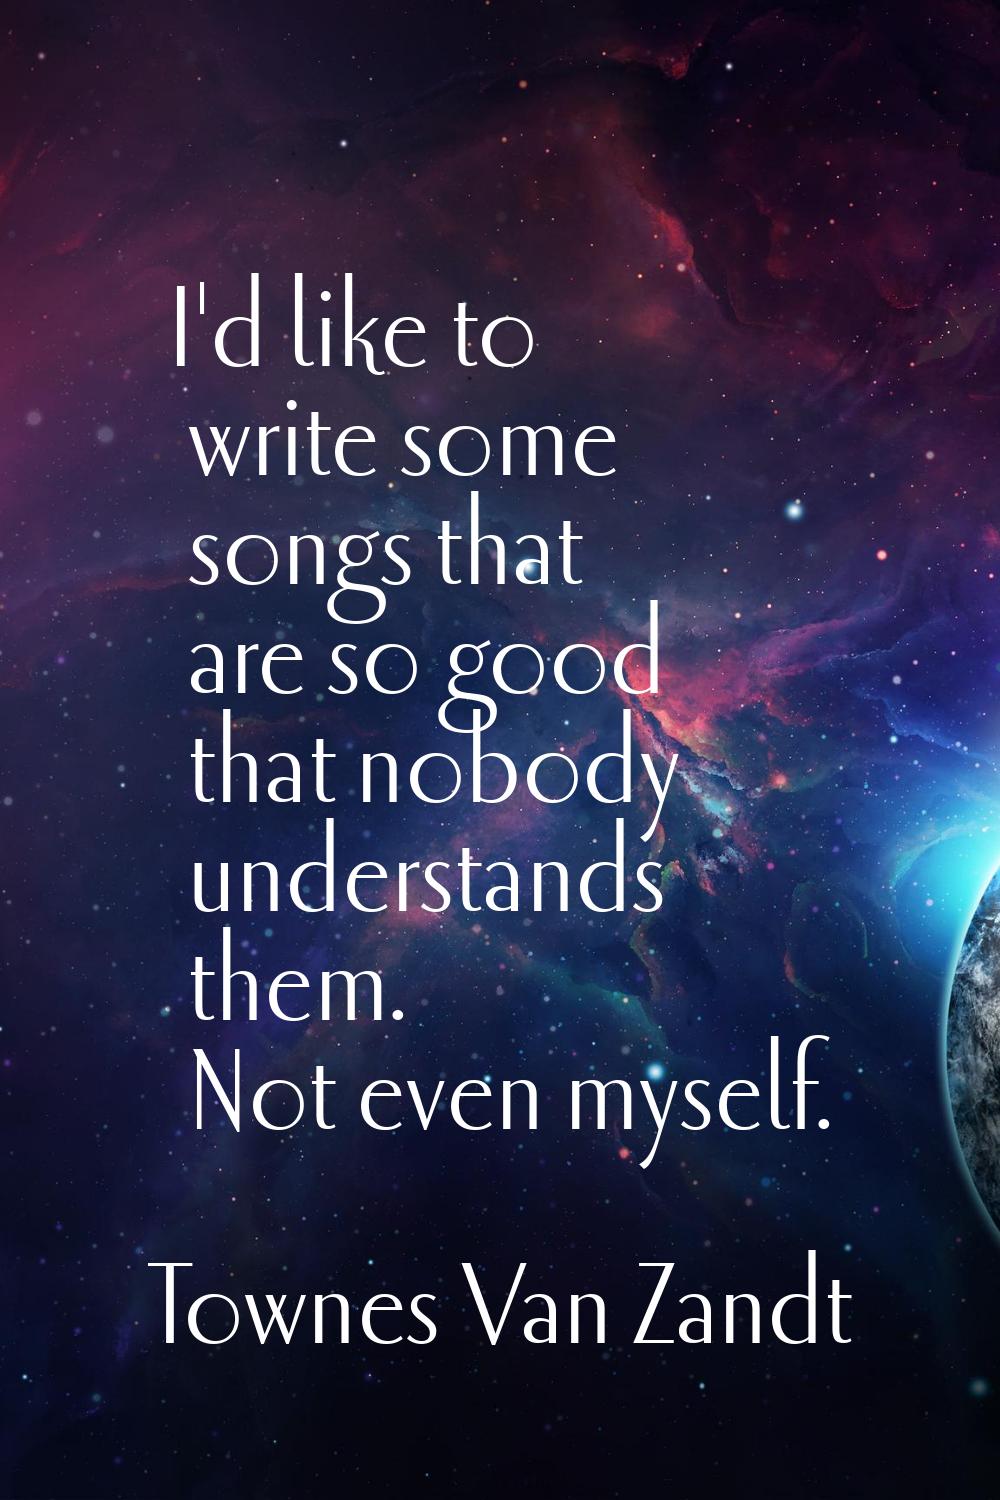 I'd like to write some songs that are so good that nobody understands them. Not even myself.